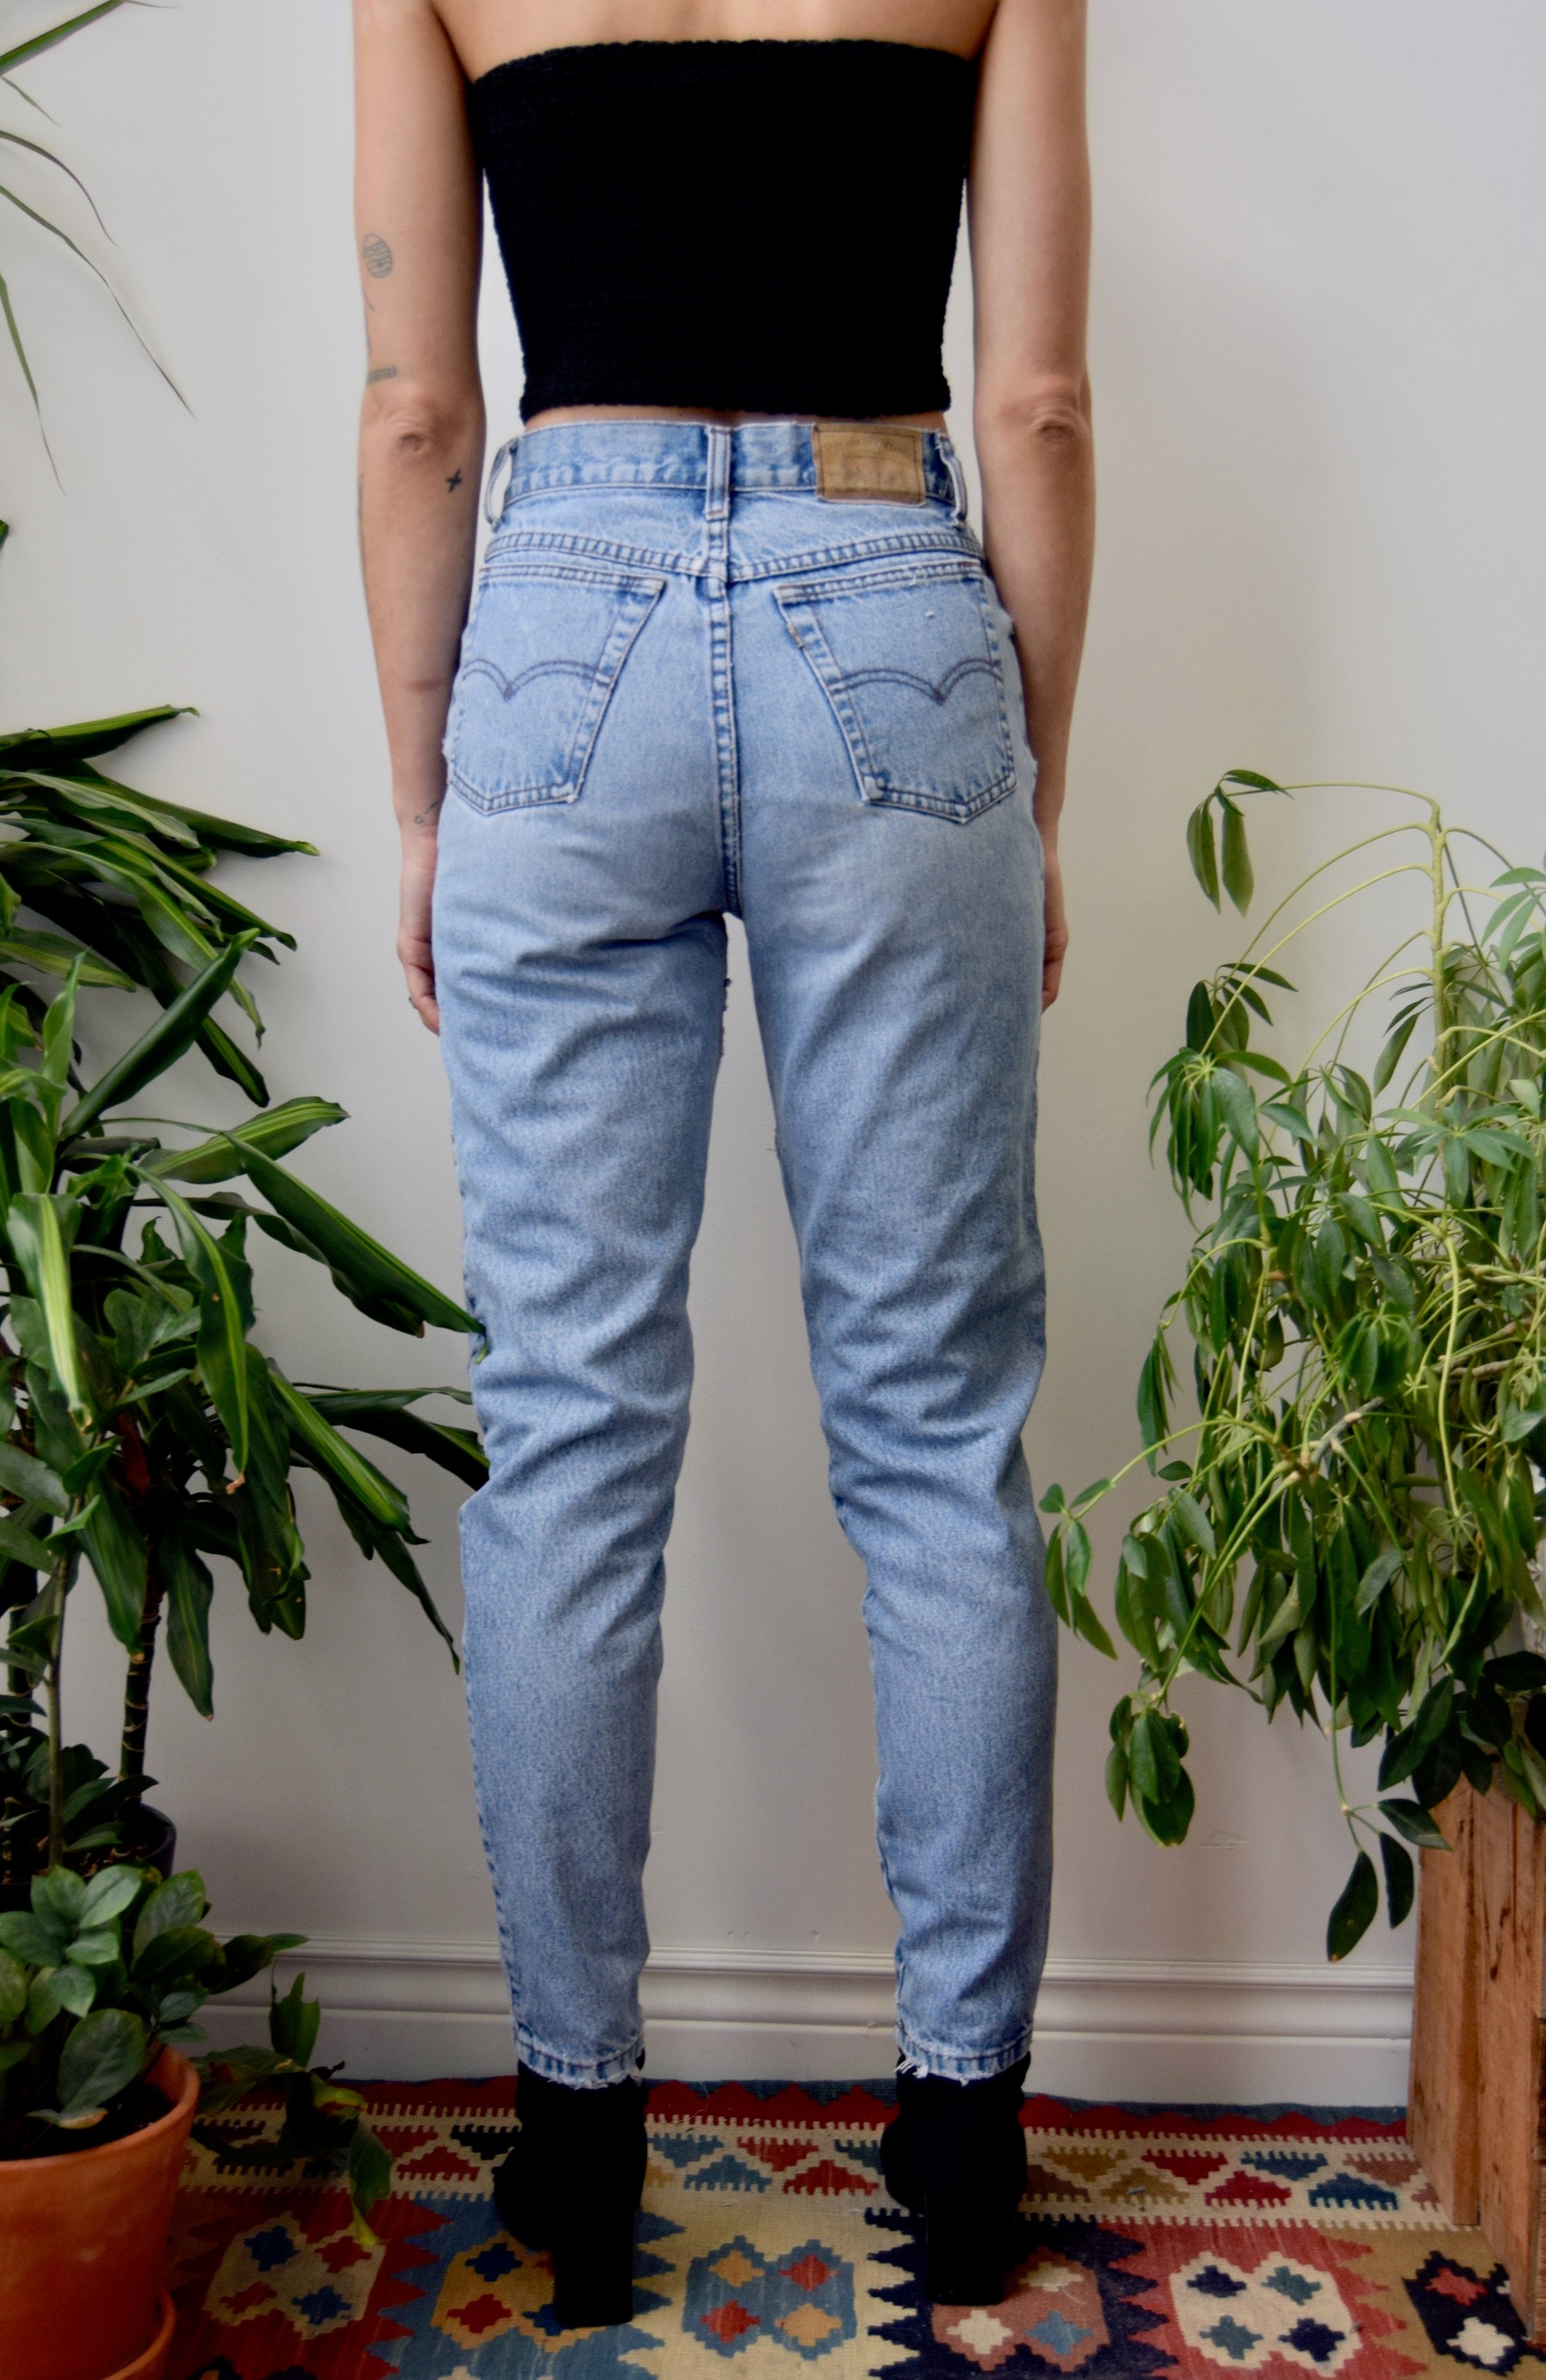 900 Series Levis – Community Thrift and Vintage